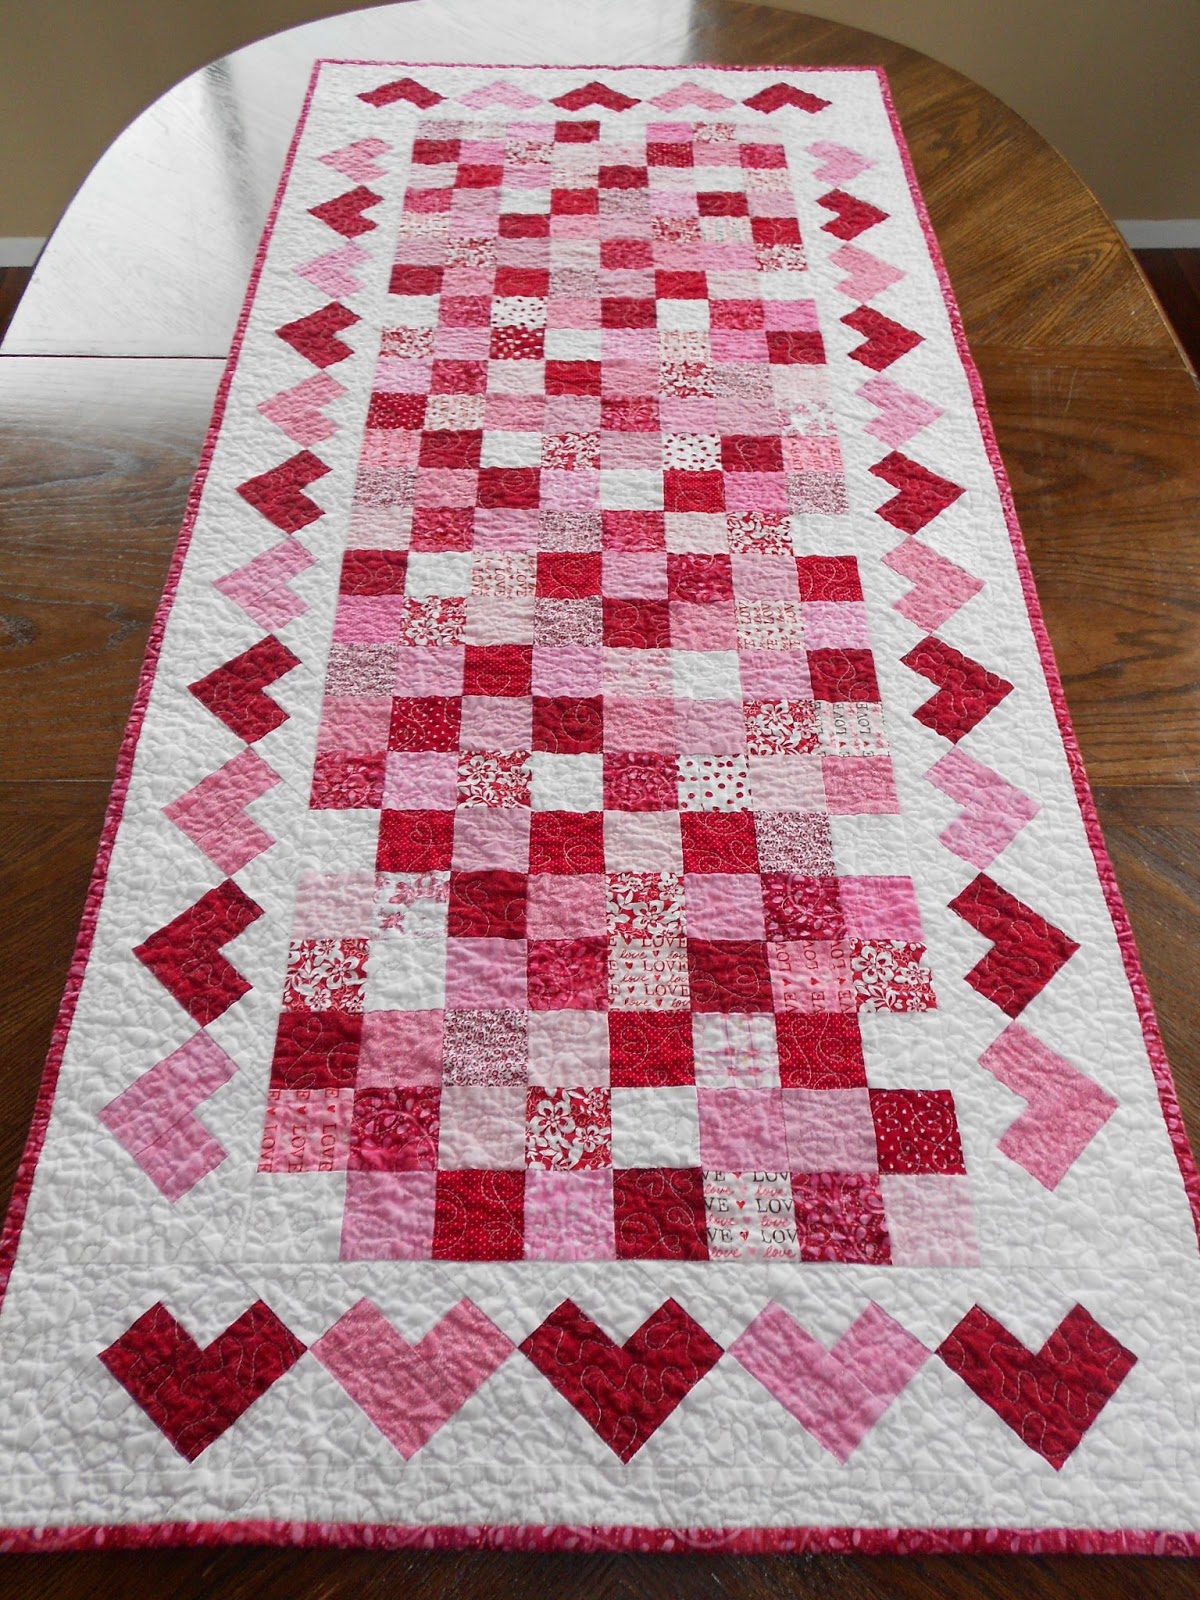 Calicos In Bloom: Valentine's Day Table Runner & Hotpads